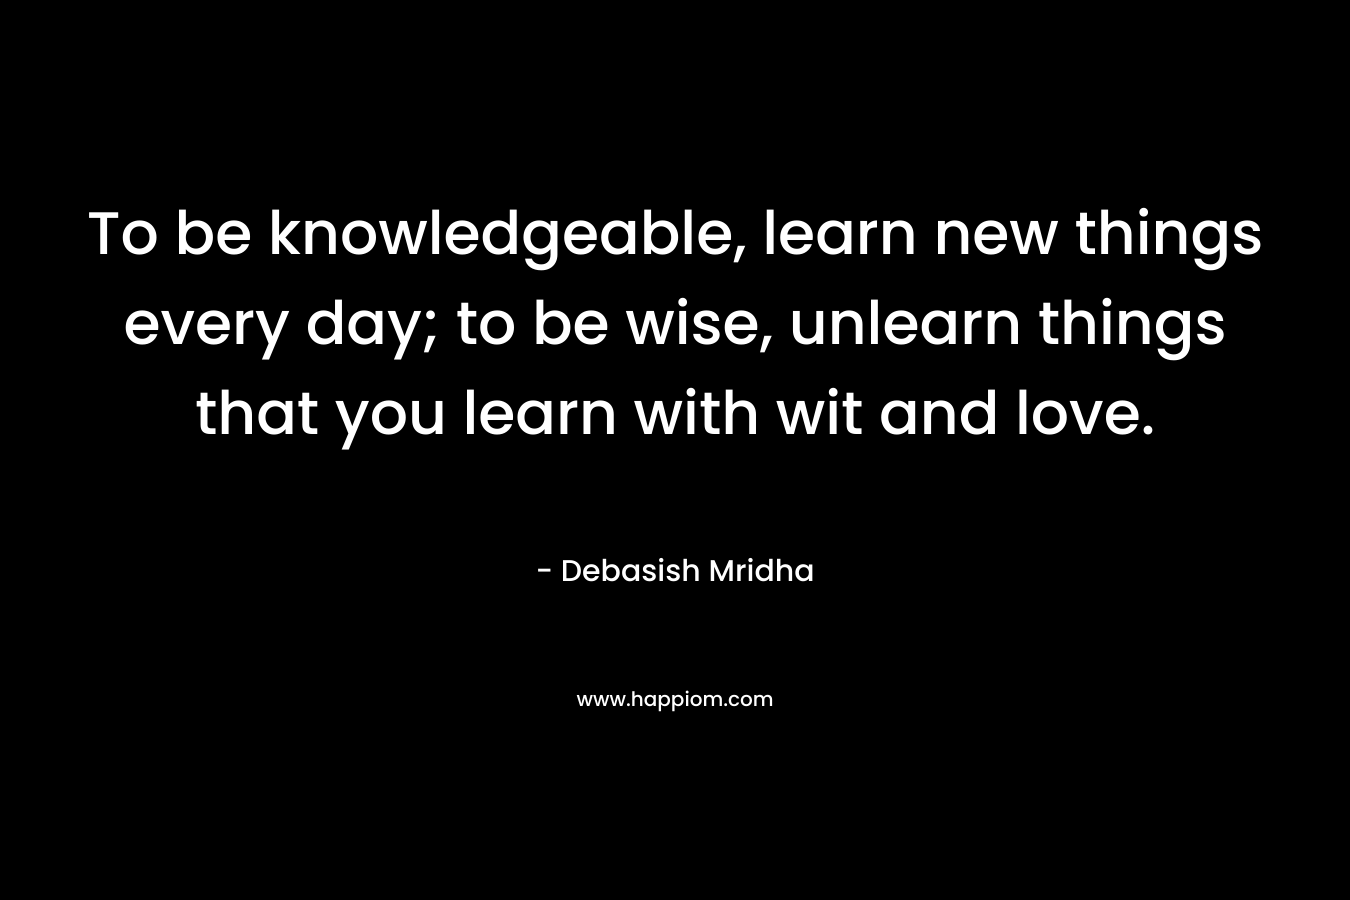 To be knowledgeable, learn new things every day; to be wise, unlearn things that you learn with wit and love. – Debasish Mridha